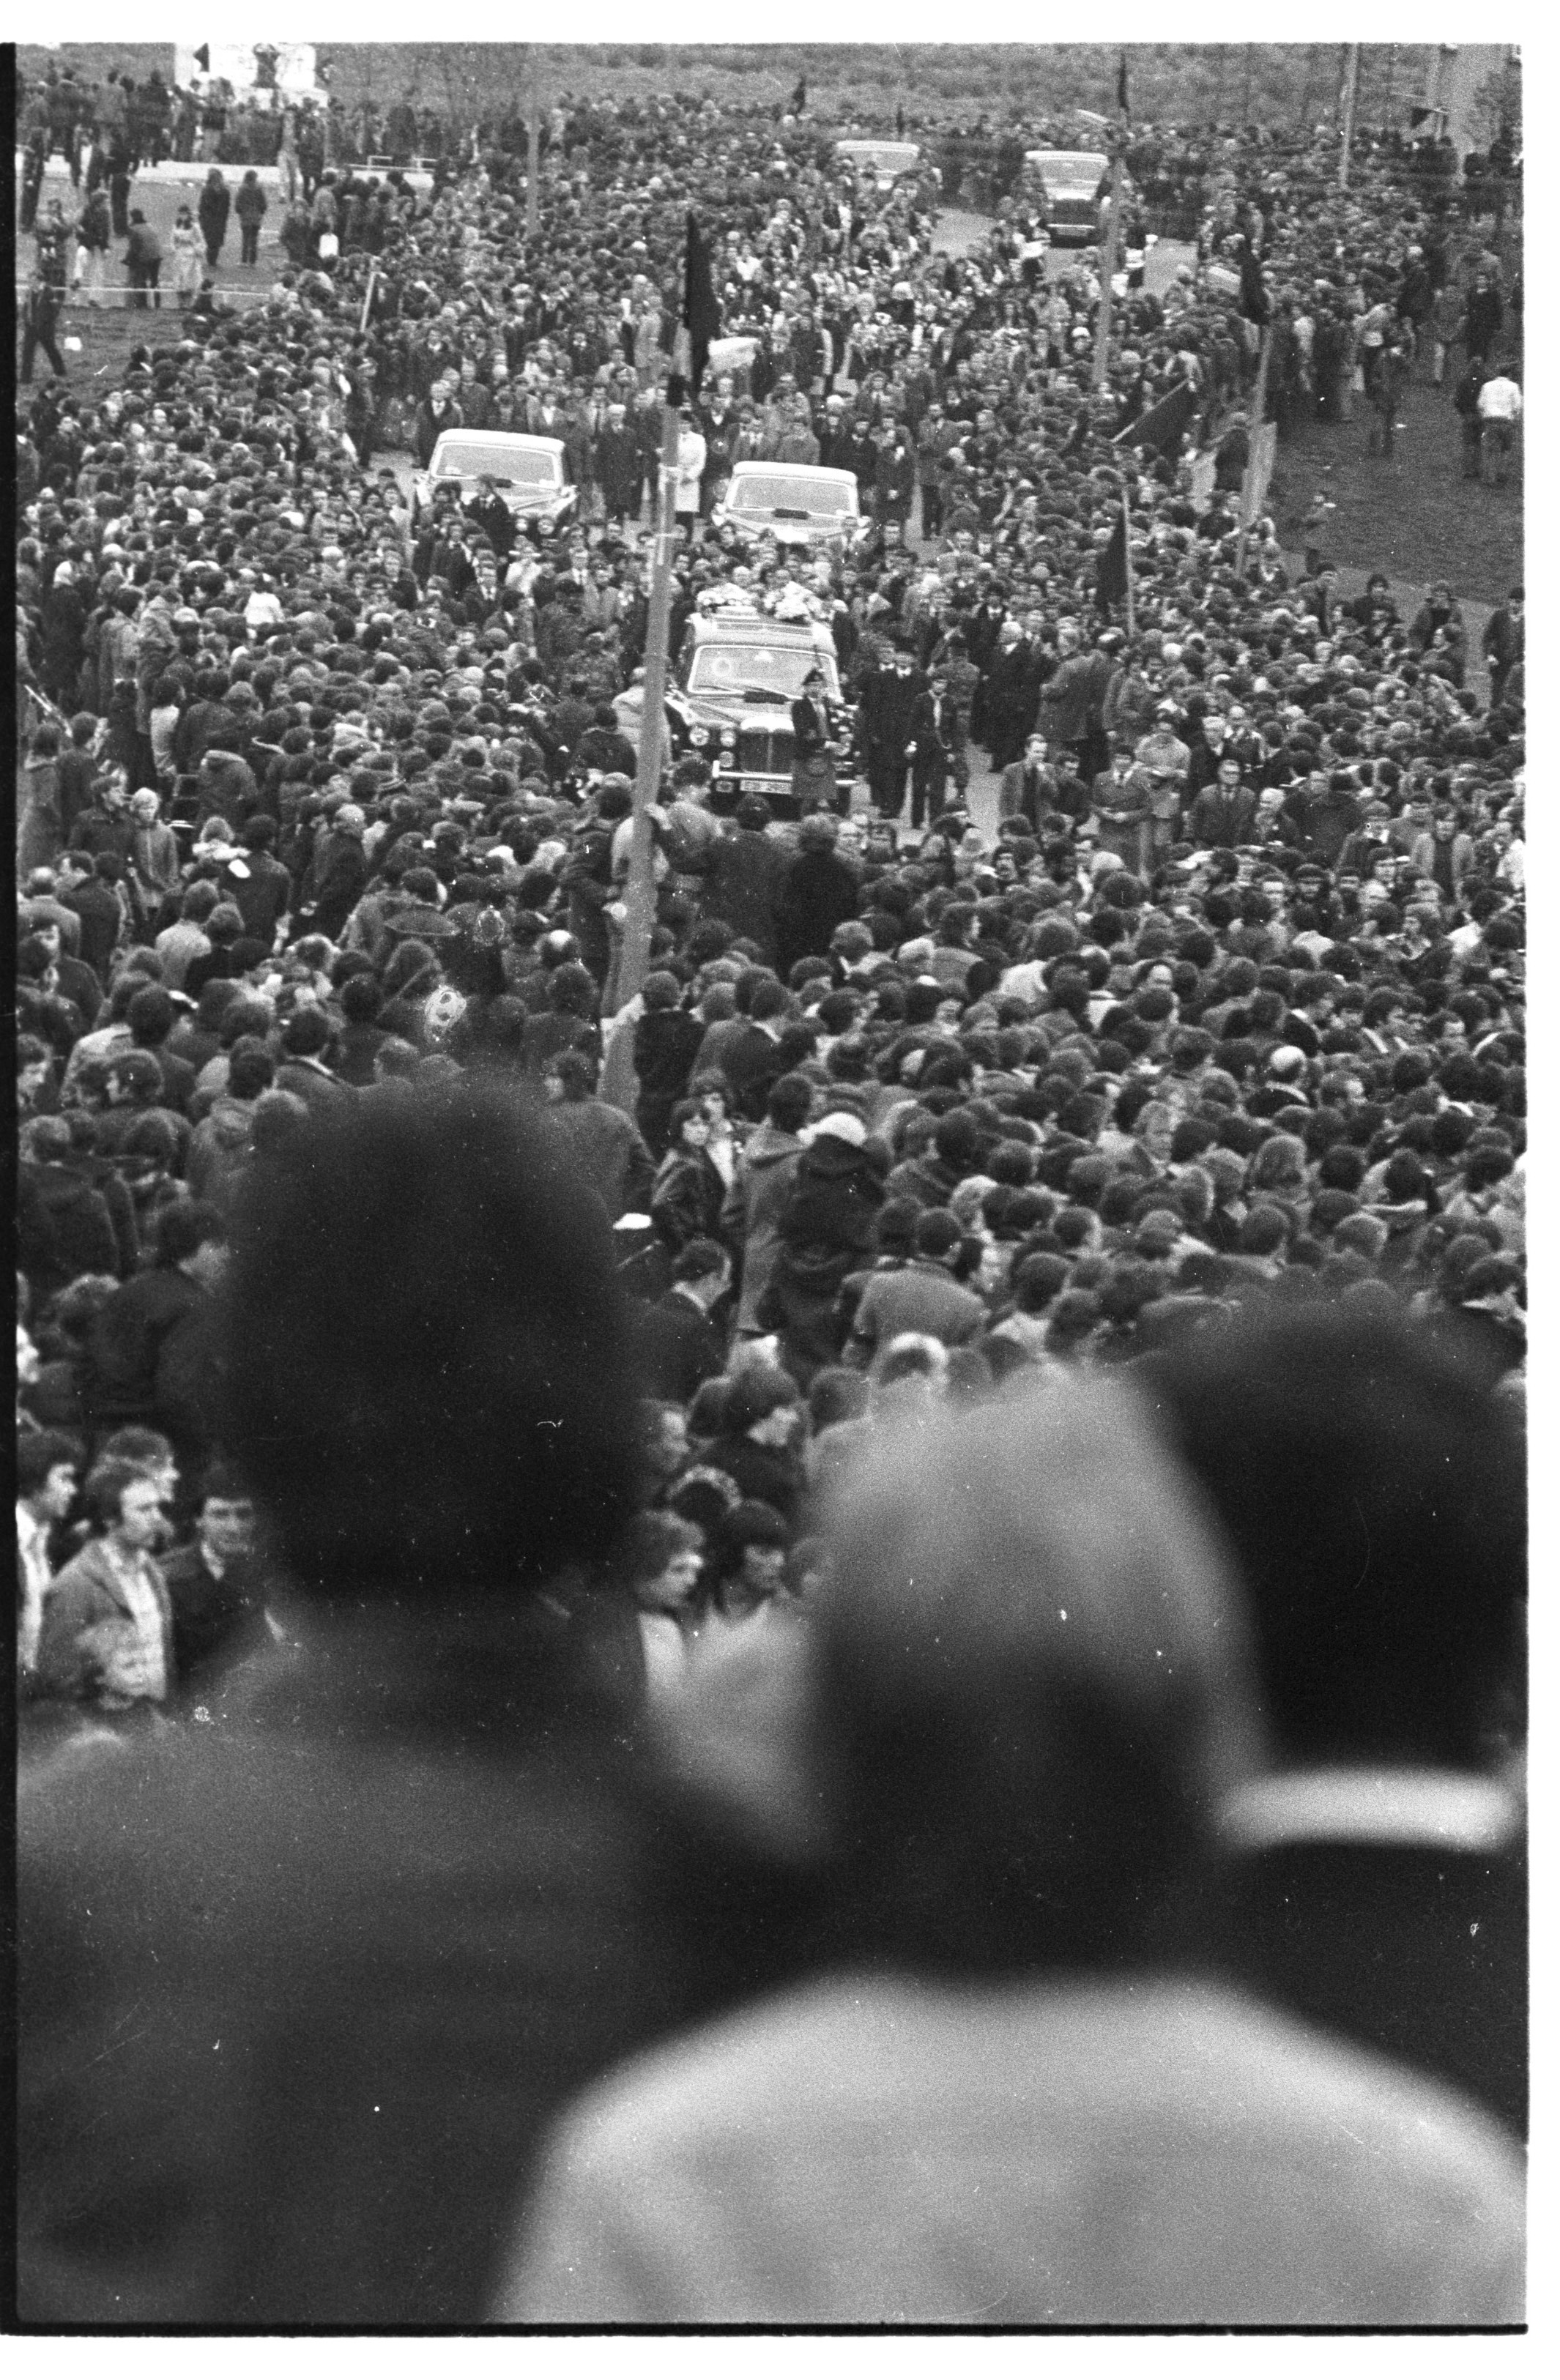 LOOKING BACK: The funeral of Bobby Sands in West Belfast in May 1981